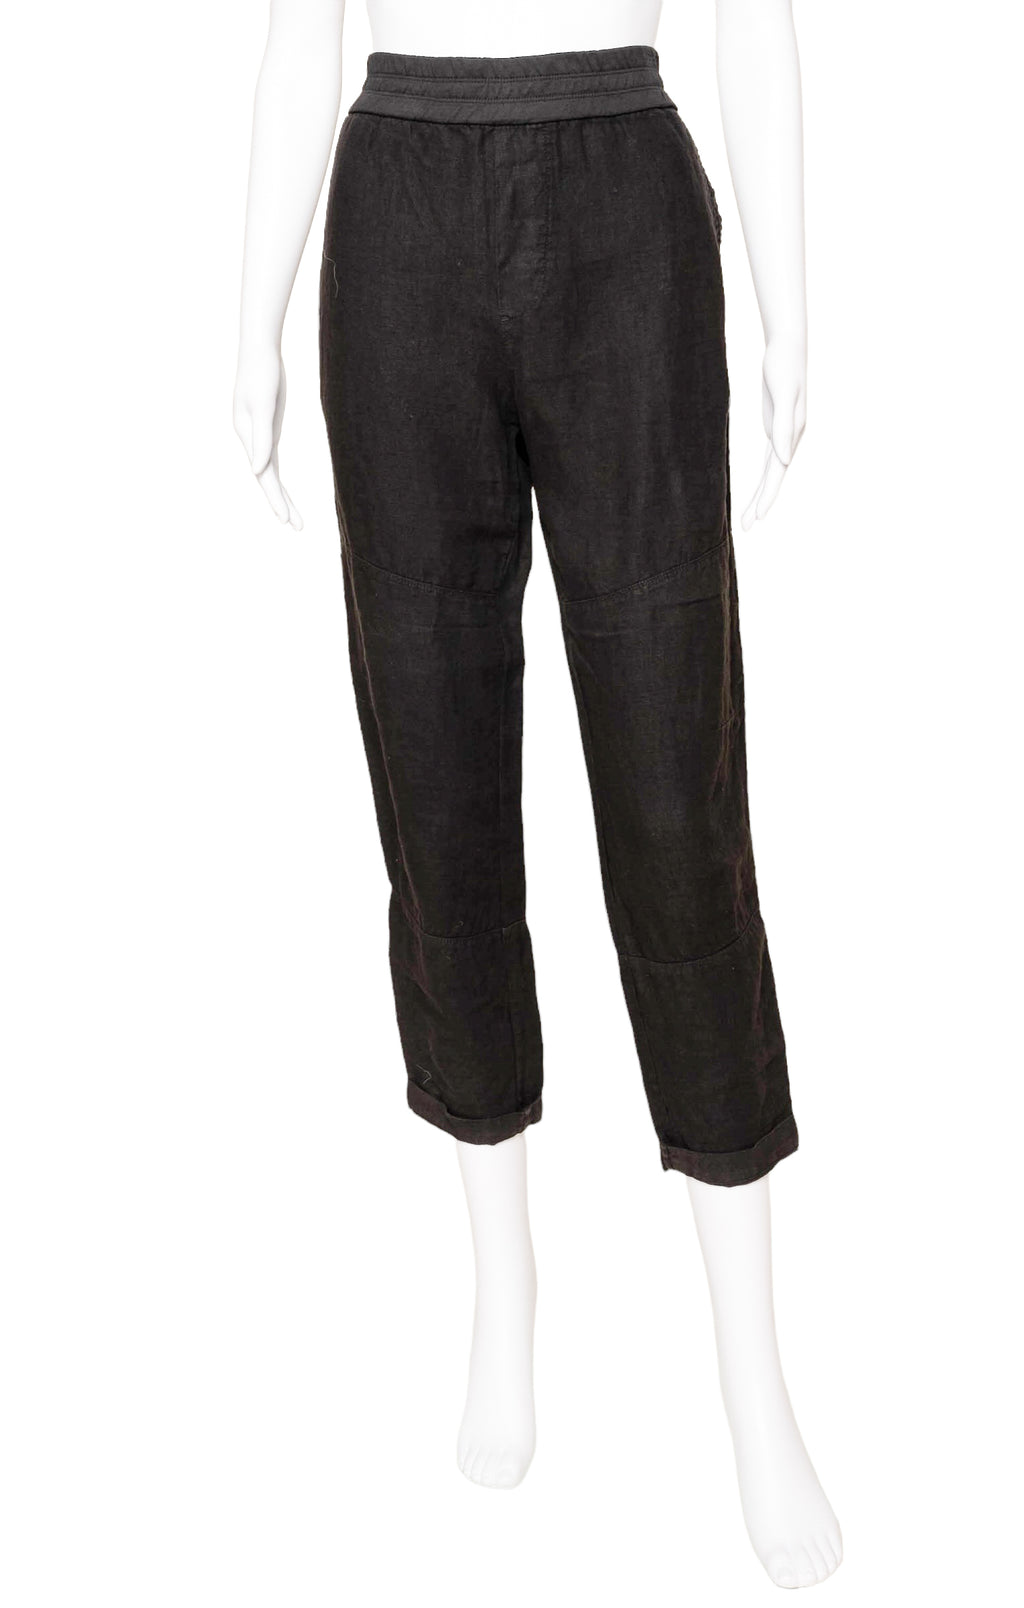 JAMES PERSE (NEW) with tags Pants Size: Marked a size 3, fits like M-L